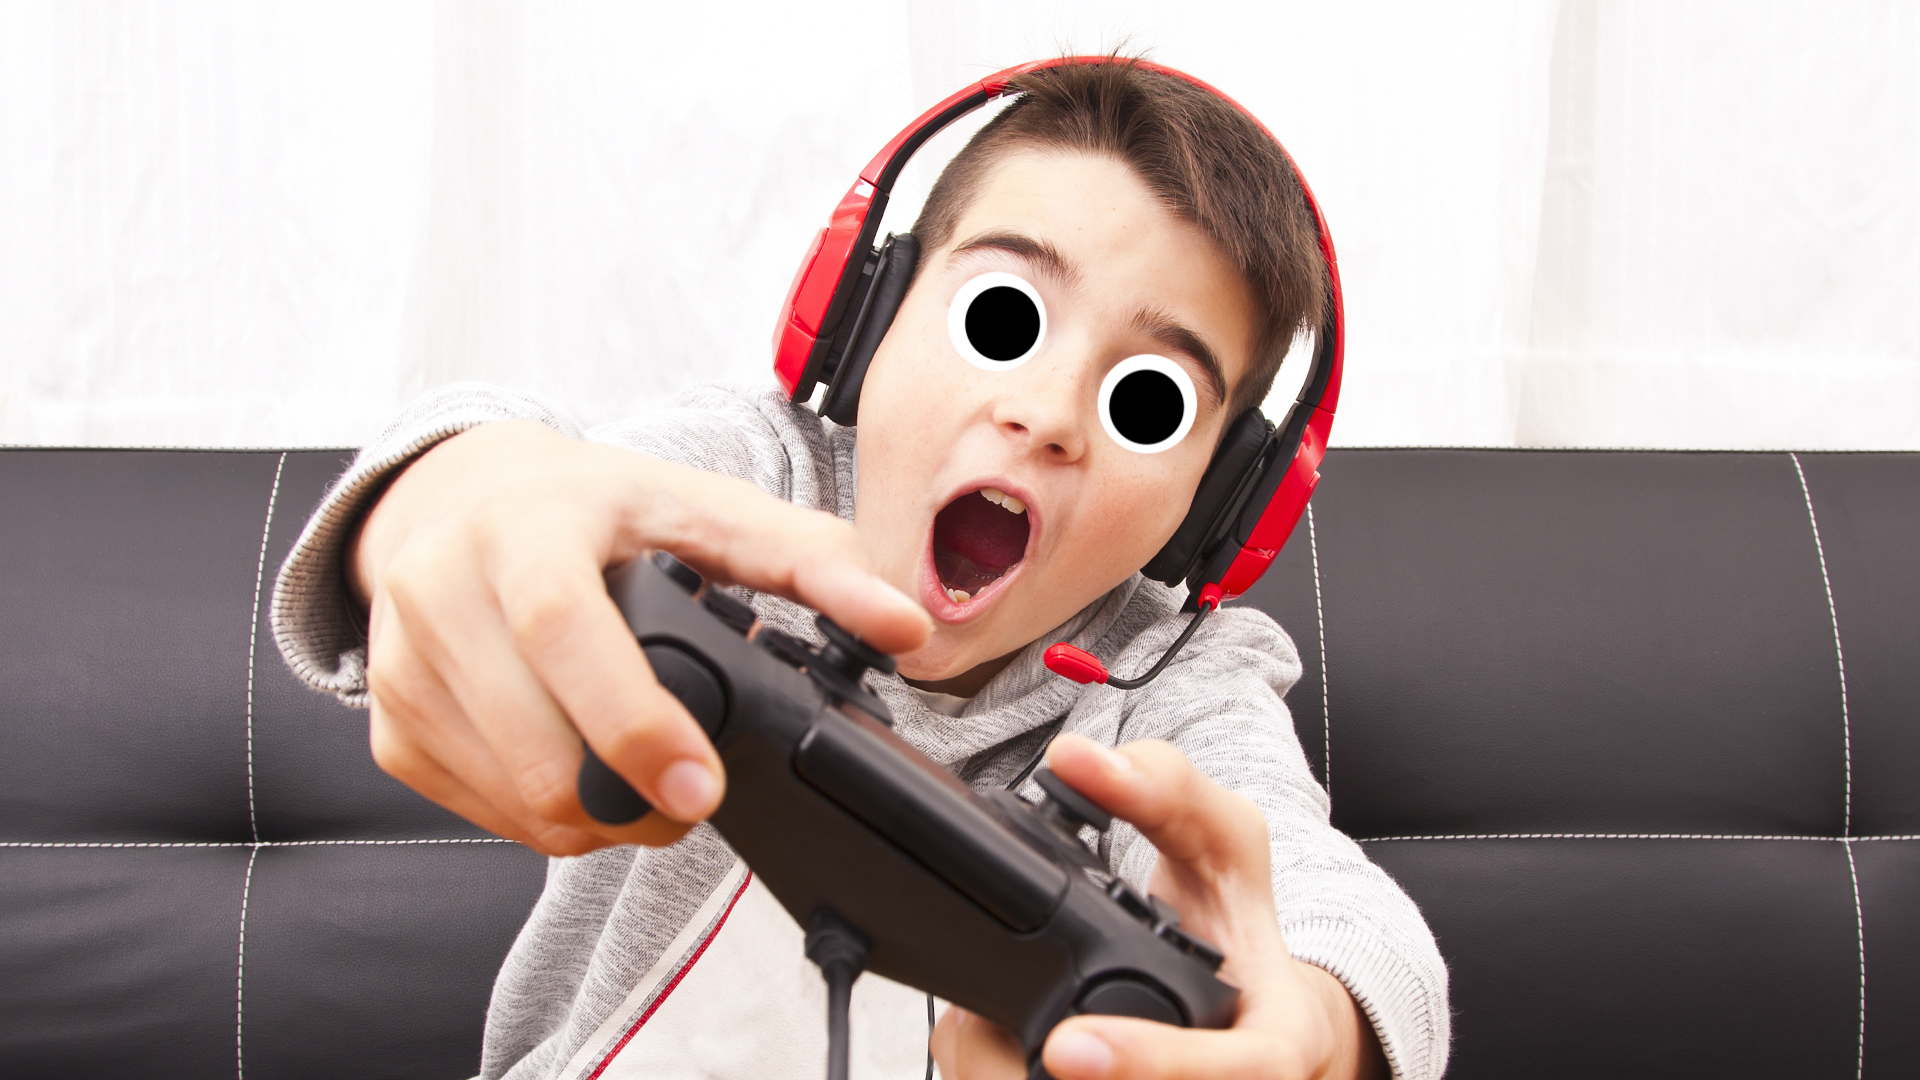 A child playing a video game with a lot of enthusiasm